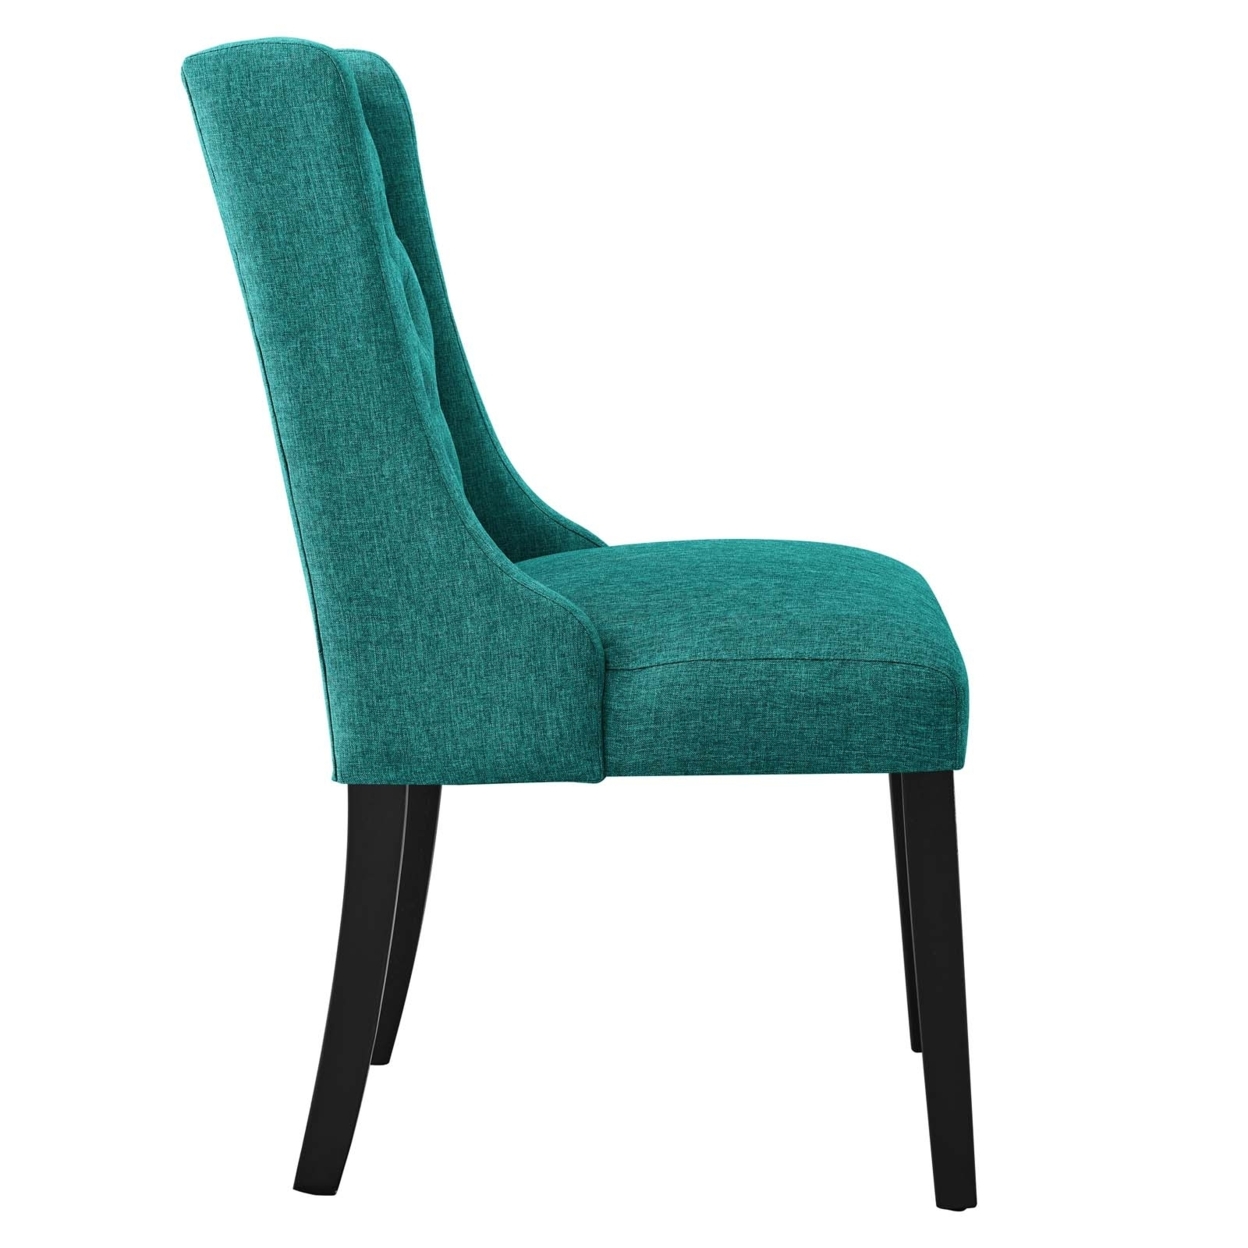 Baronet Button Tufted Fabric Dining Chair, Teal